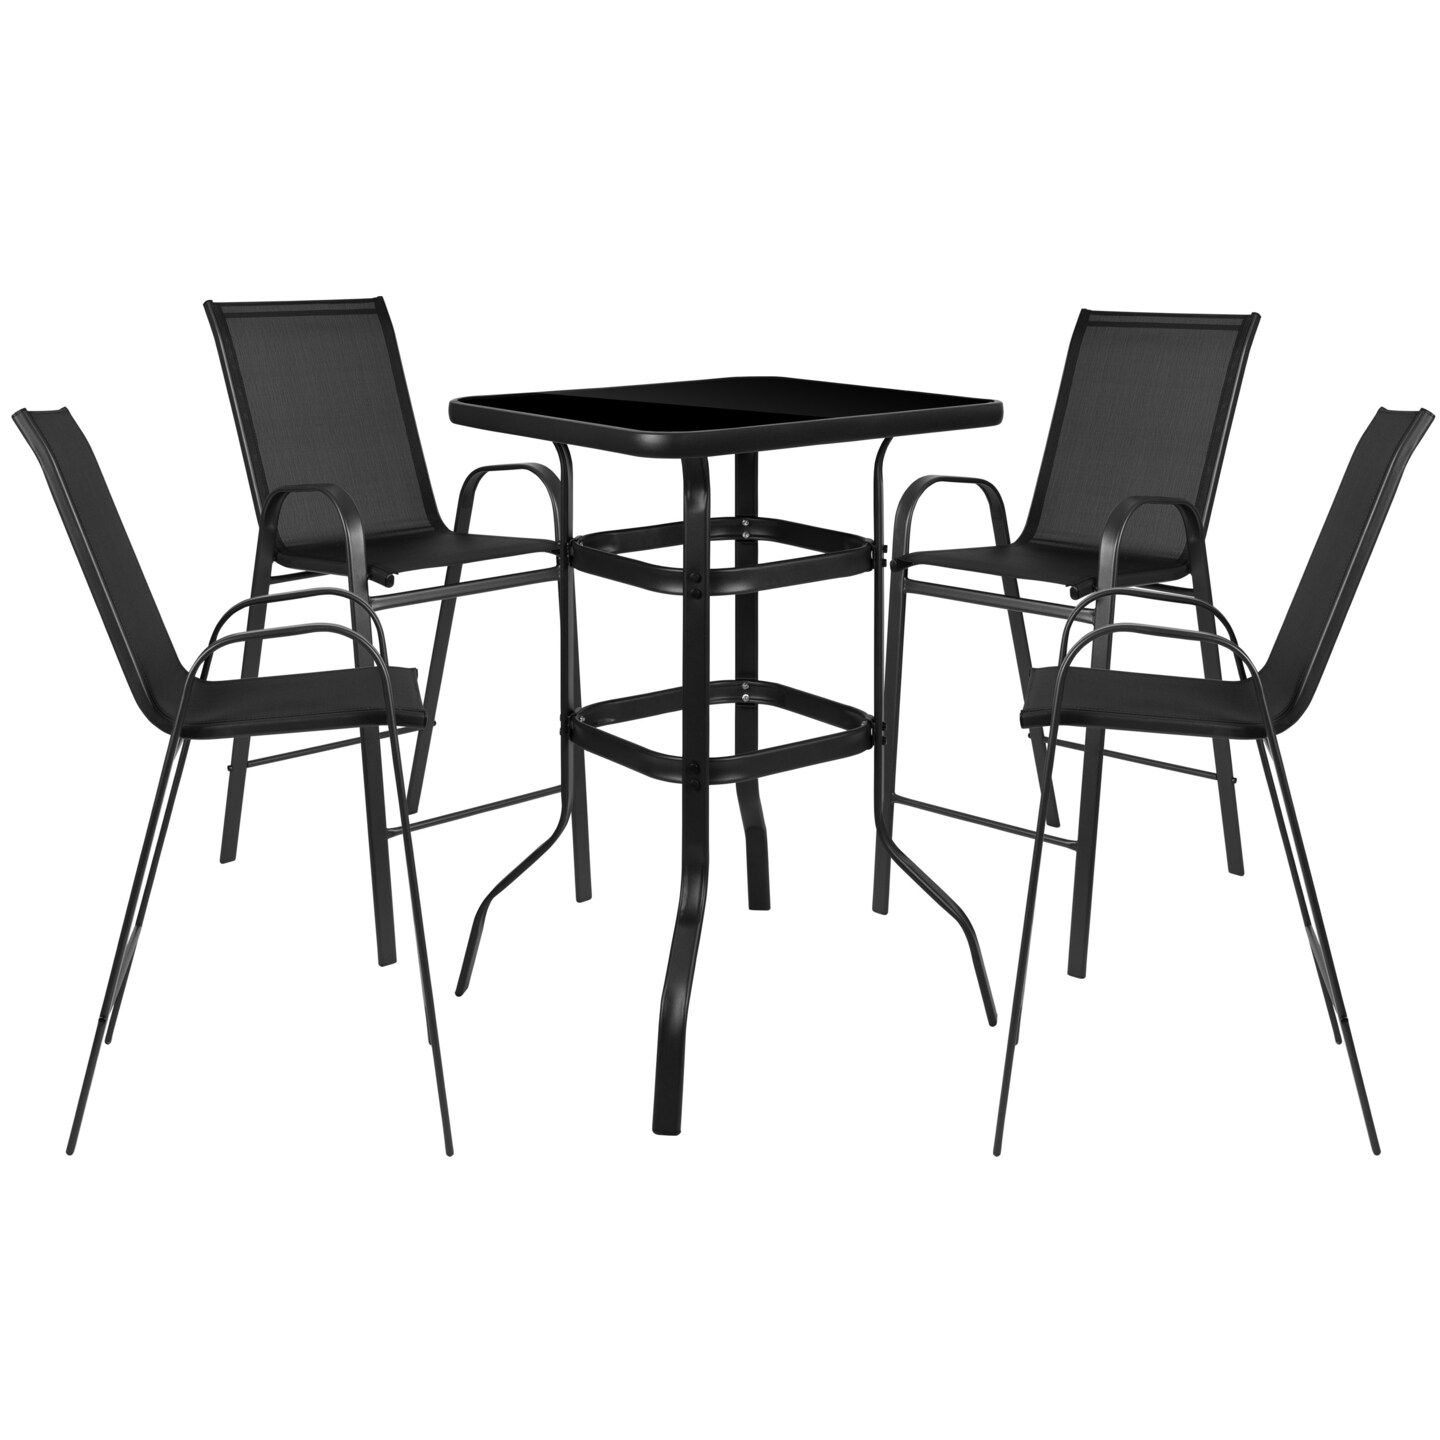 Emma and Oliver 5 Piece Outdoor Bar Height Set-Glass Patio Bar Table-All-Weather Barstools